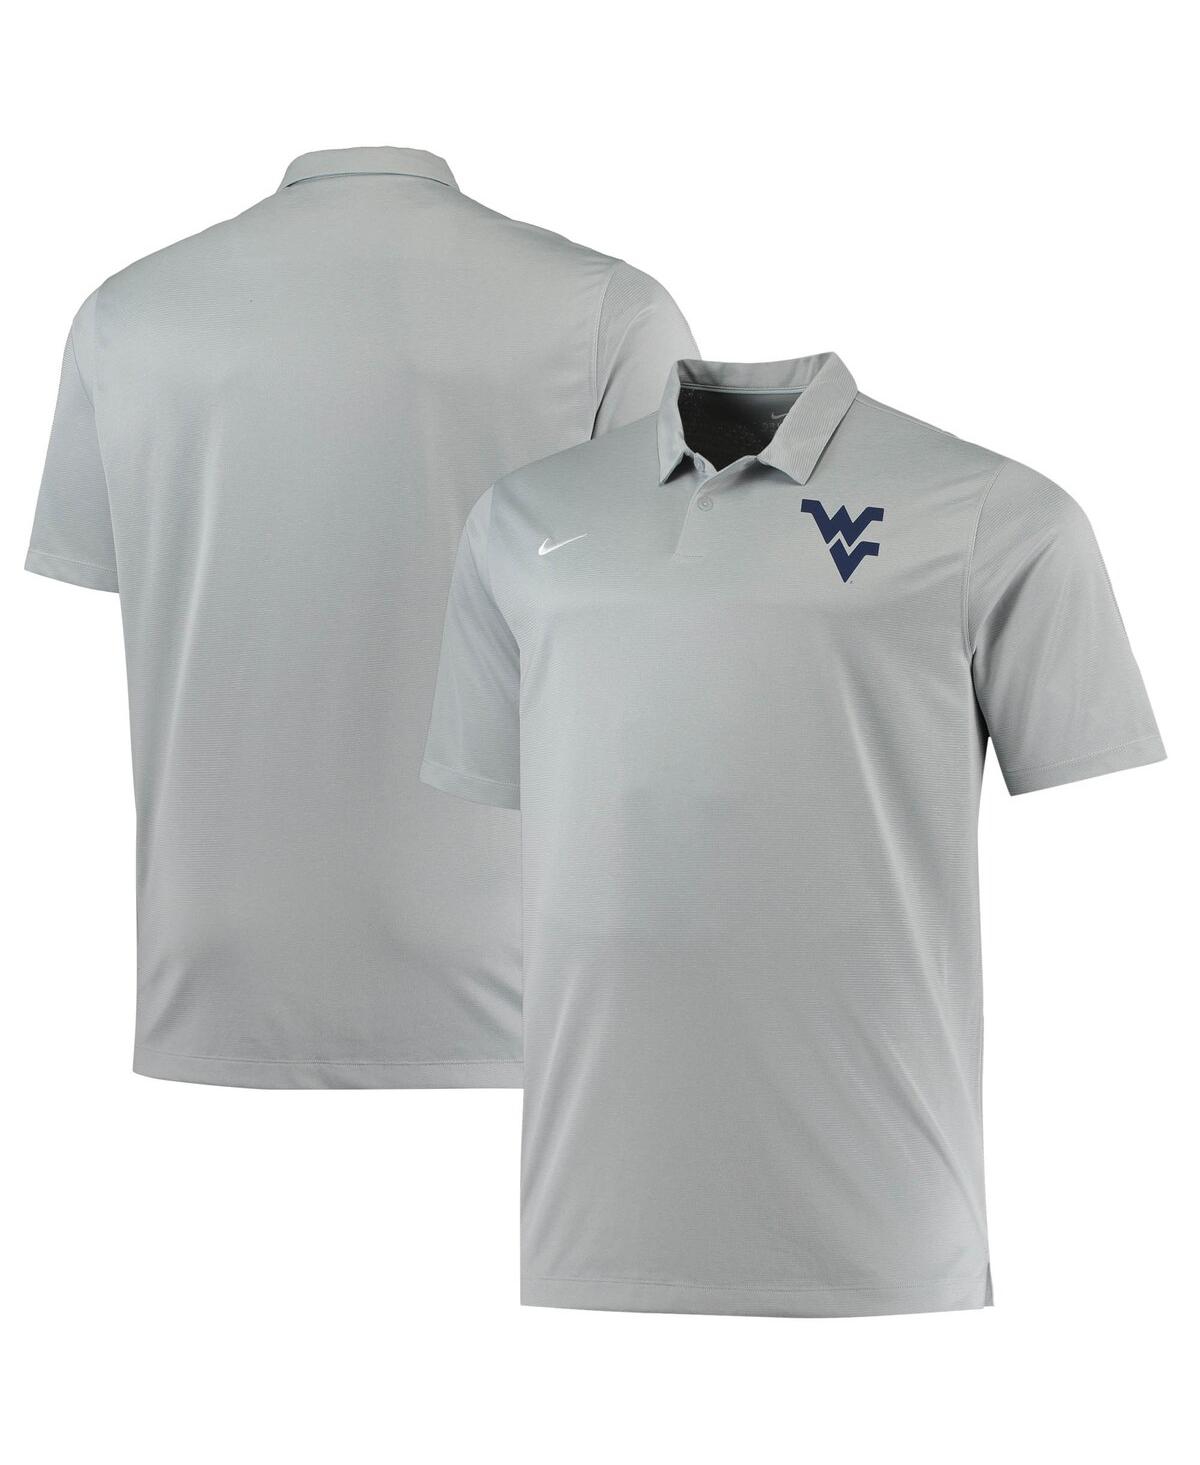 Shop Nike Men's  Heathered Gray West Virginia Mountaineers Big And Tall Performance Polo Shirt